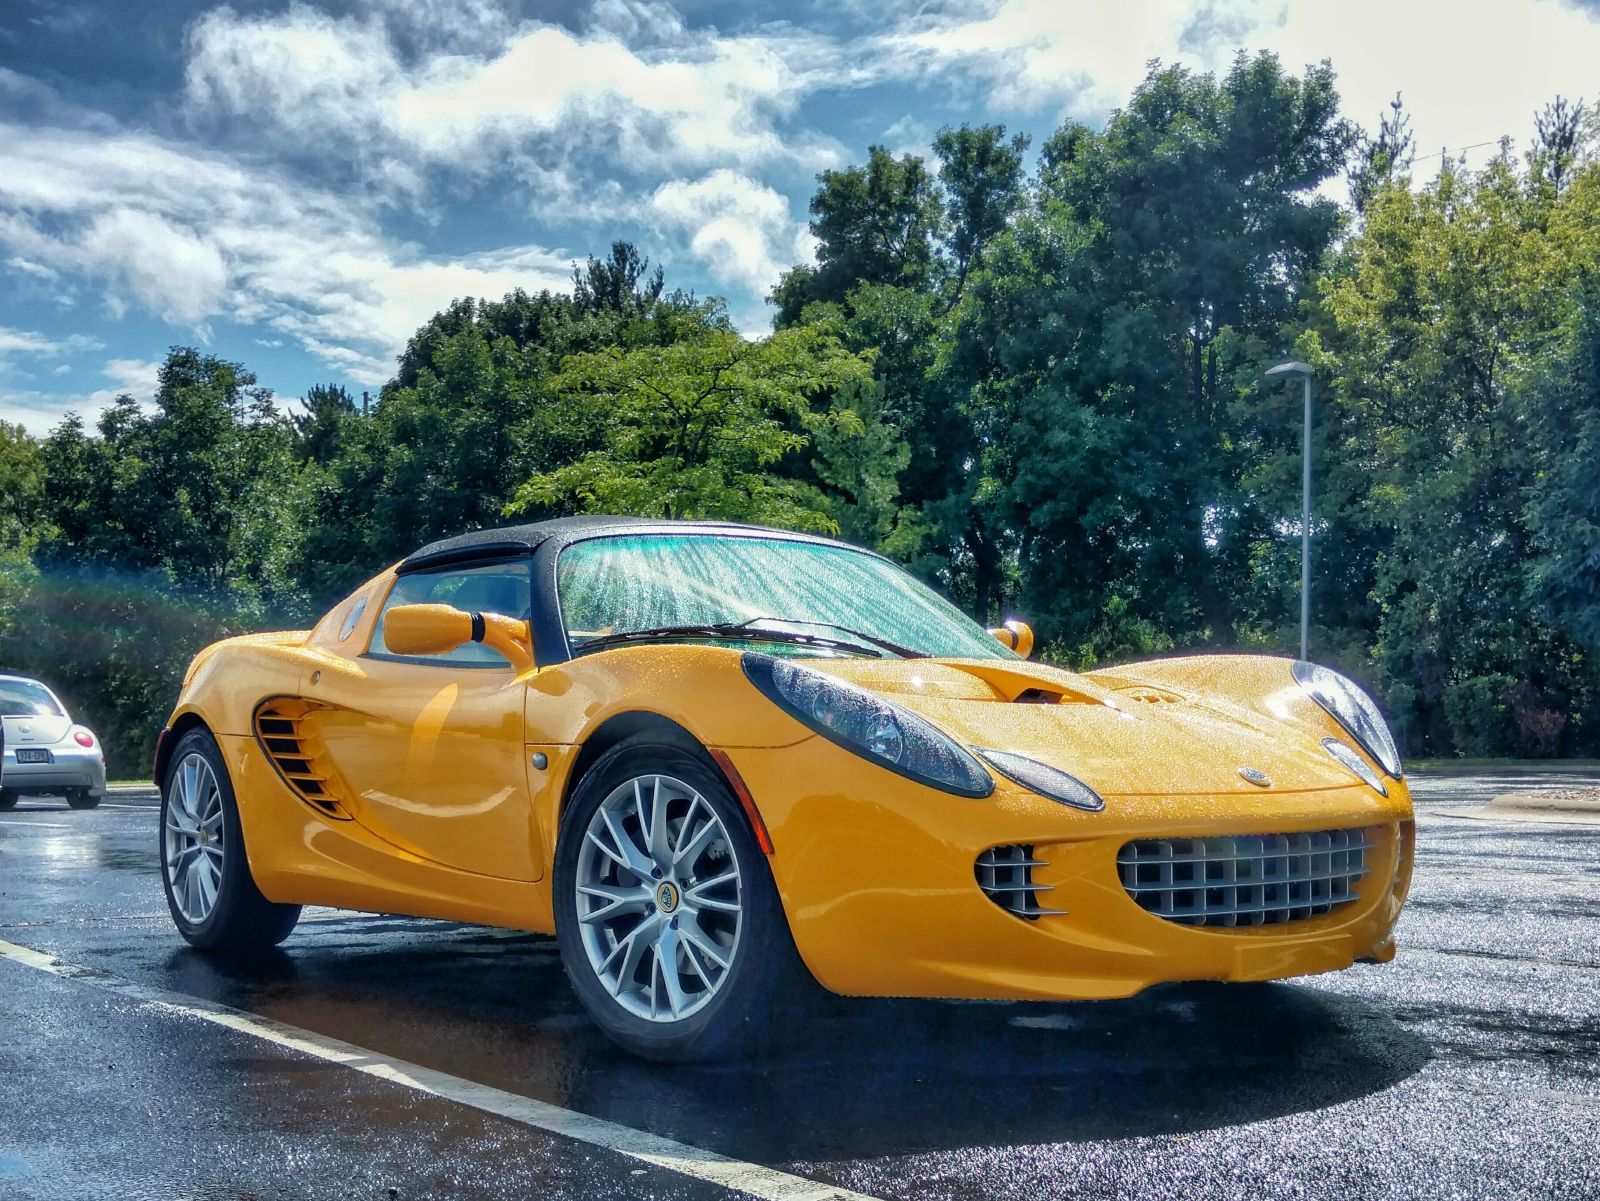 Illustration for article titled My coworker who drives this Elise is in for some unpleasantness (NOW WITH AFTERNOON WEATHER UPDATE)